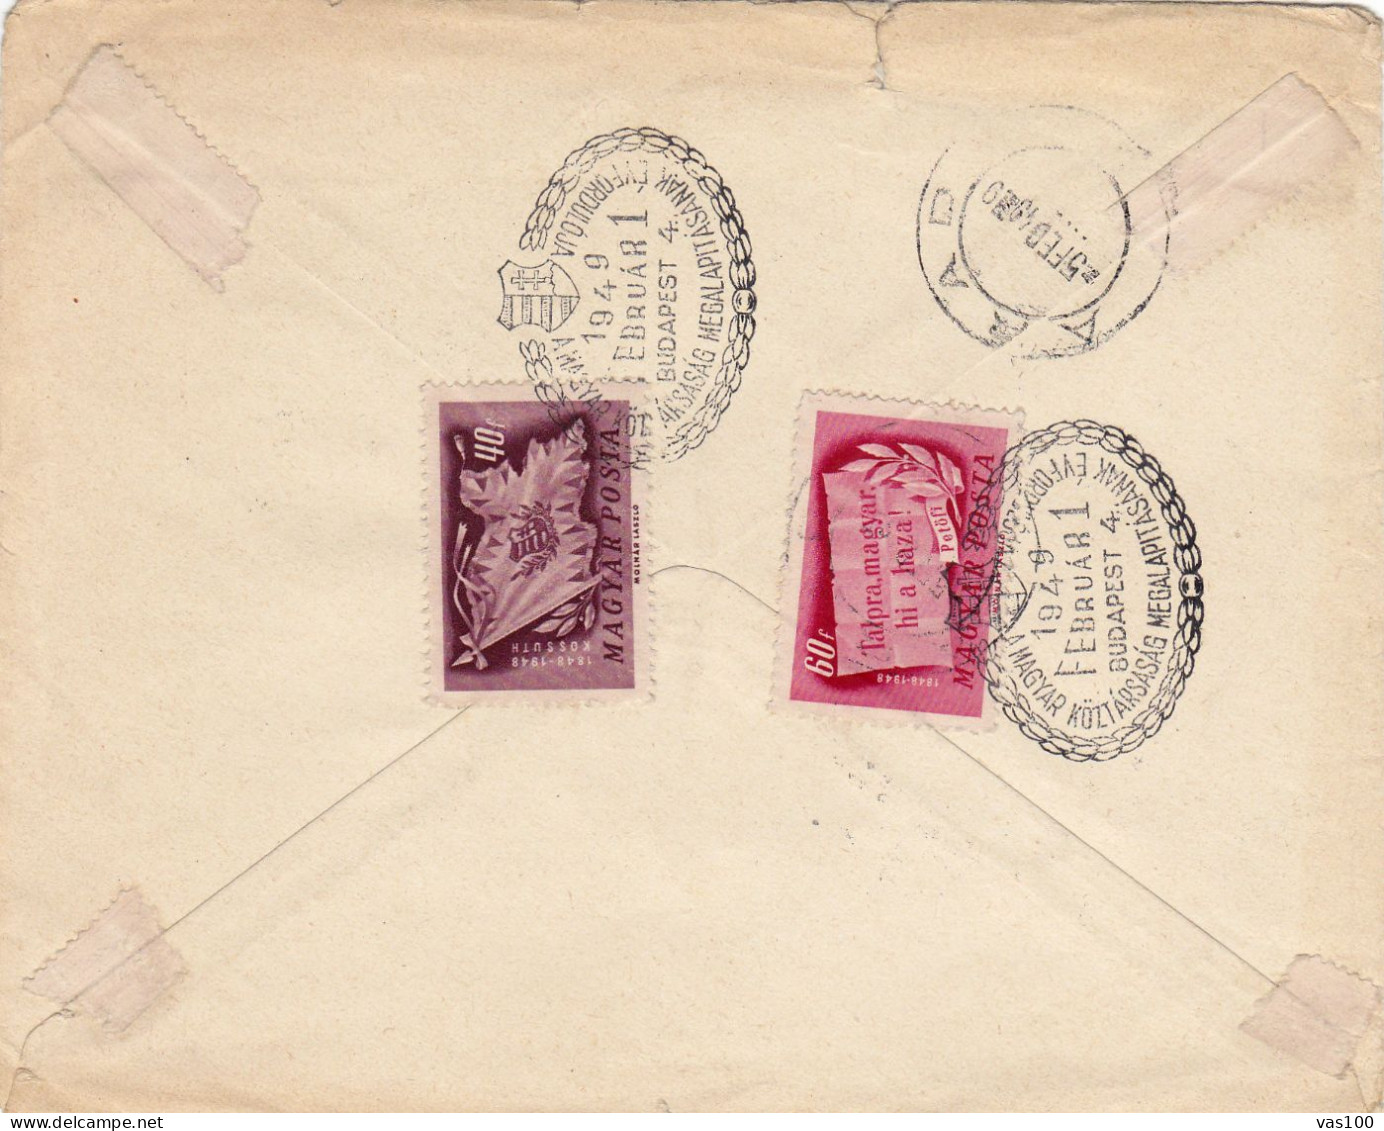 HISTORICAL DOCUMENTS  REGISTERED   COVERS  NICE FRANKING  1949  HUNGARY - Storia Postale